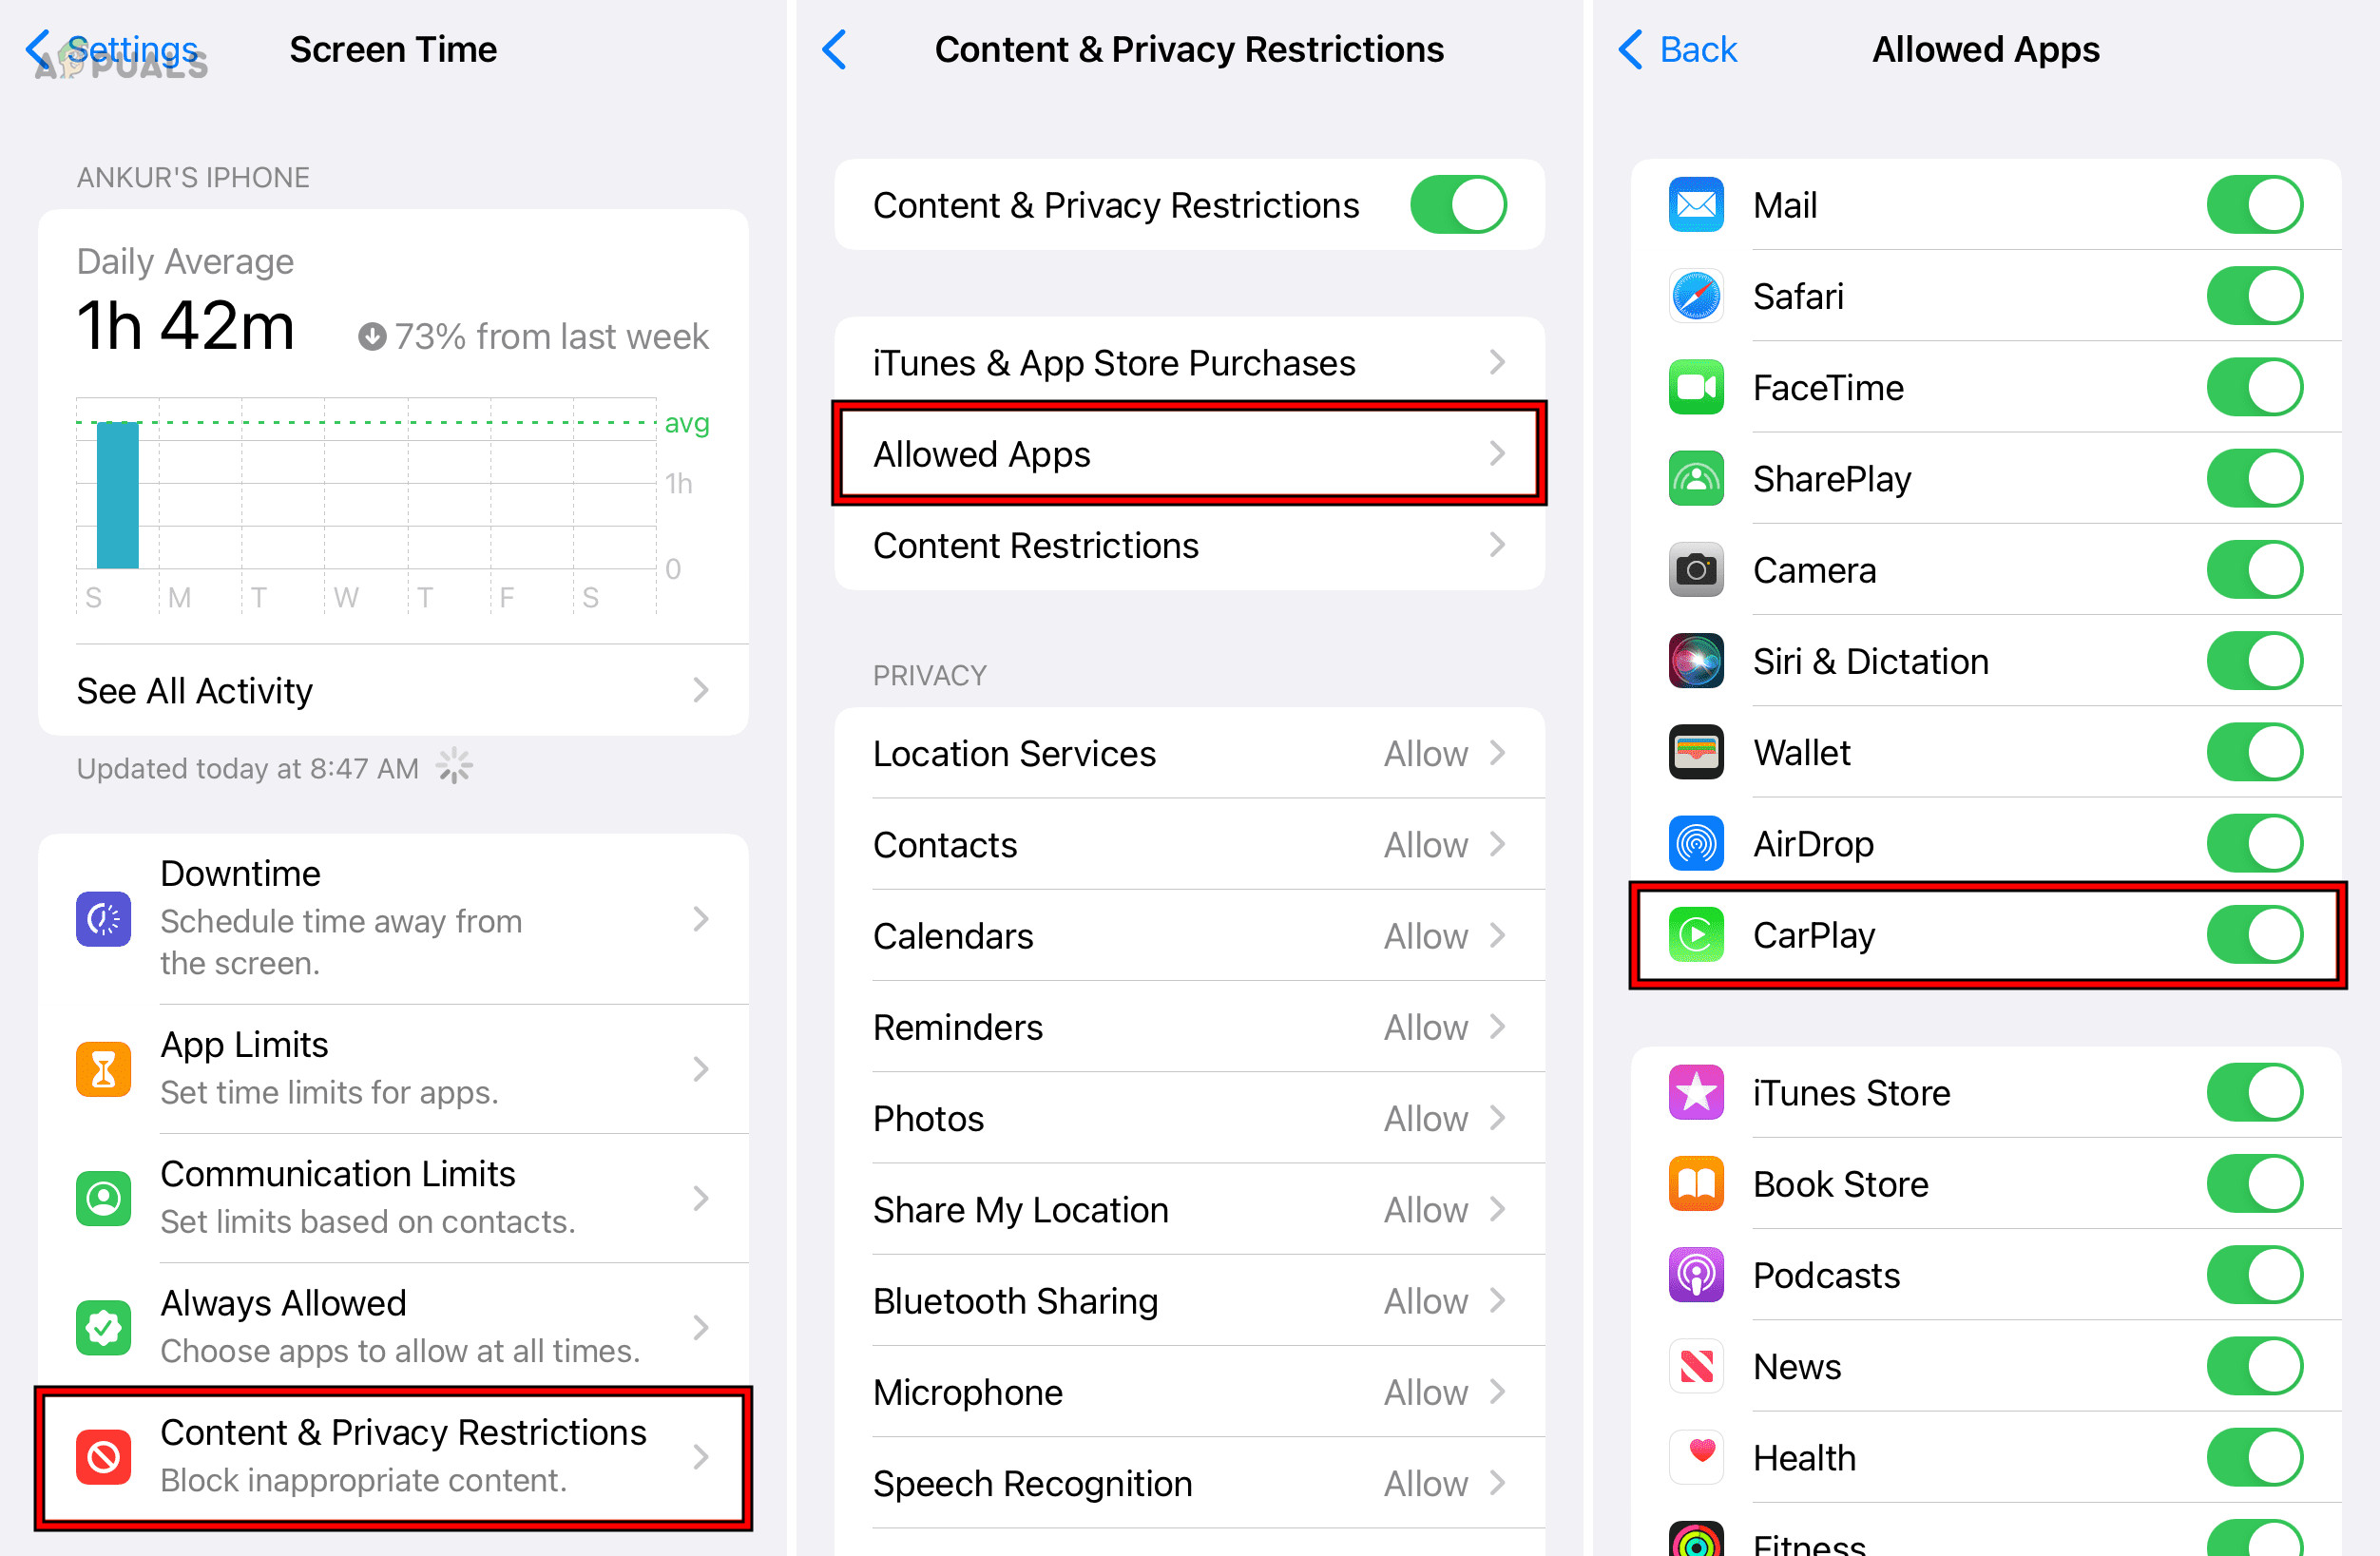 Enable CarPlay in the iPhone's Screen Time Settings